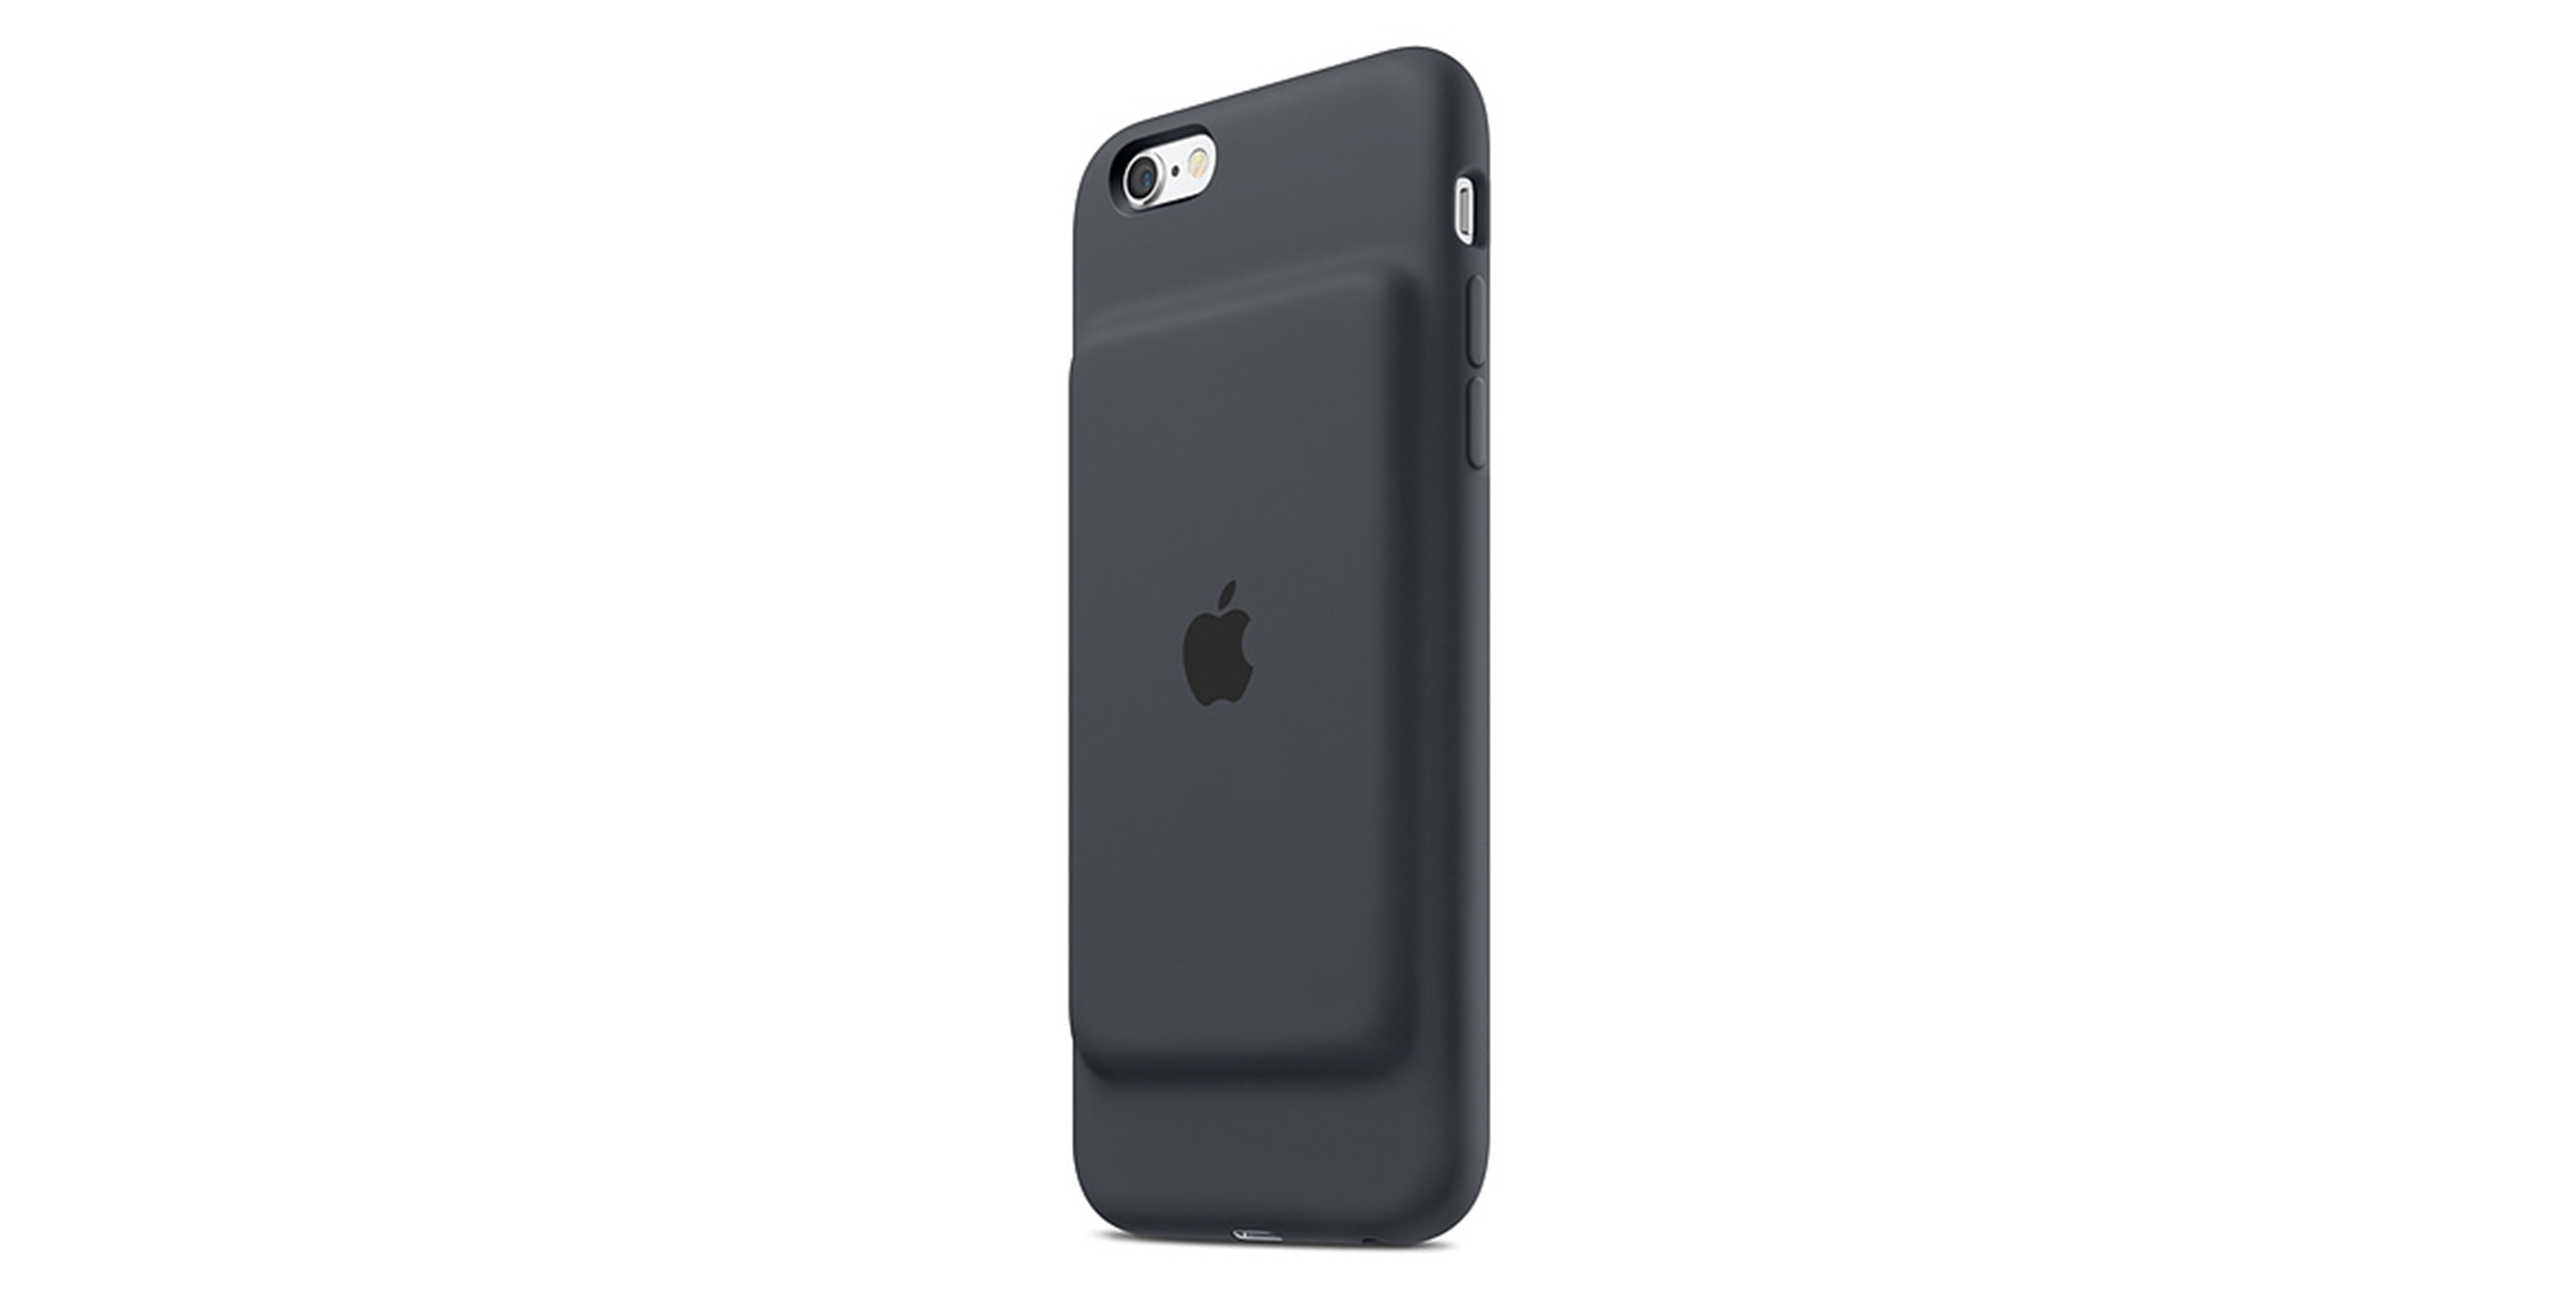 iPhone 6 Smart Battery Case